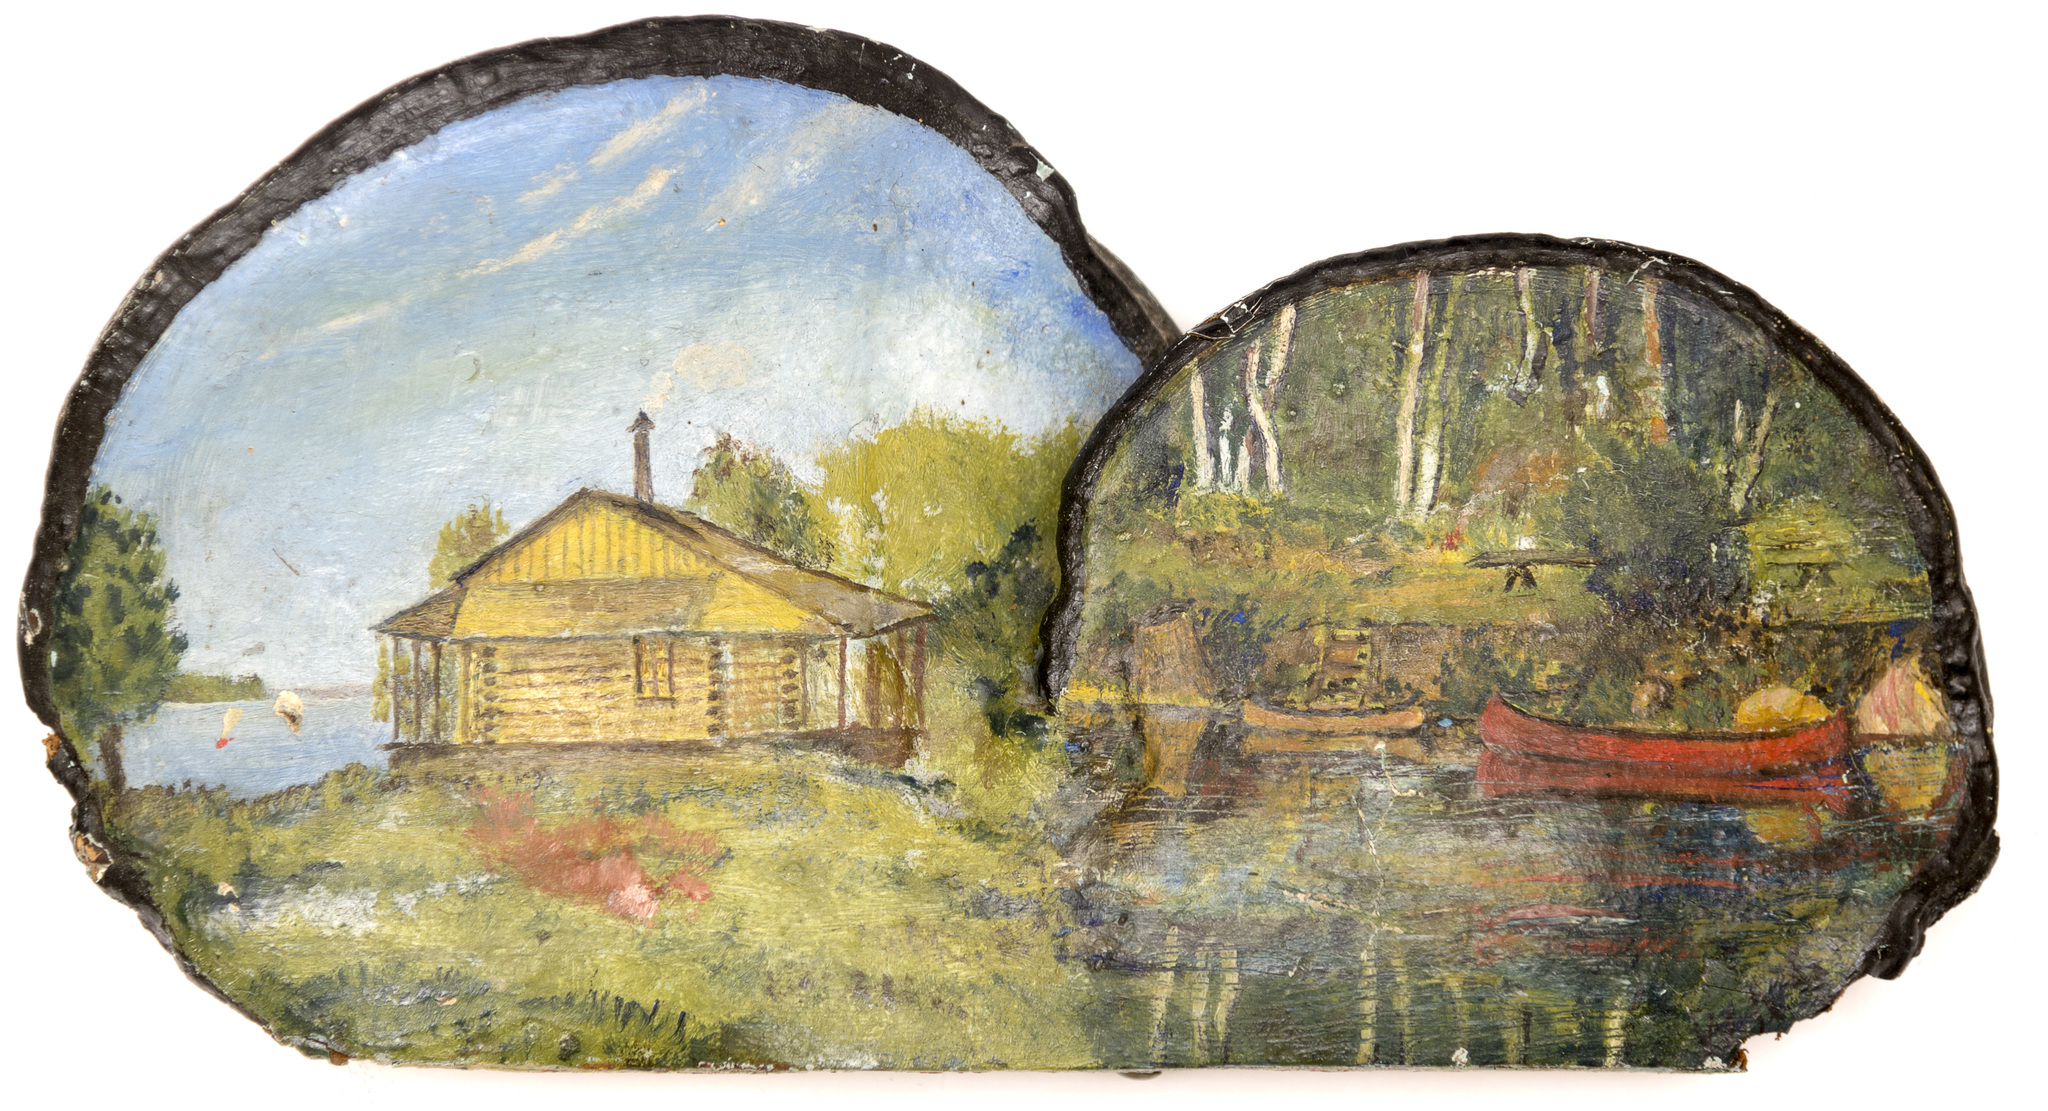 Painted fungus showing lakeside log building on left and canoes in water on right